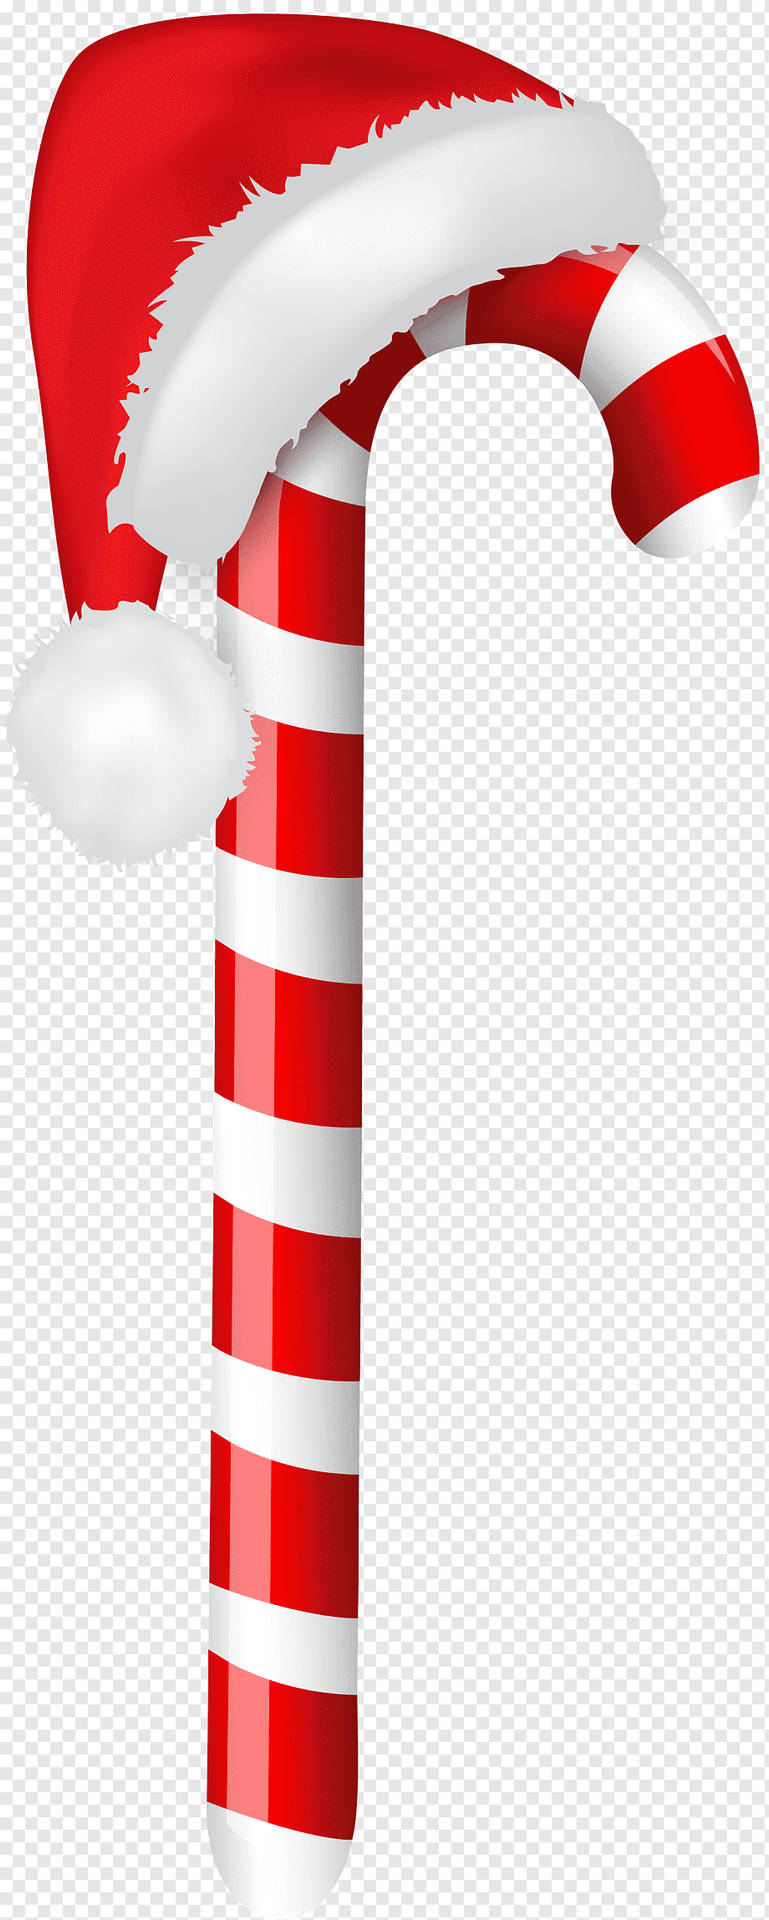 Candy Cane With Christmas Hat Background